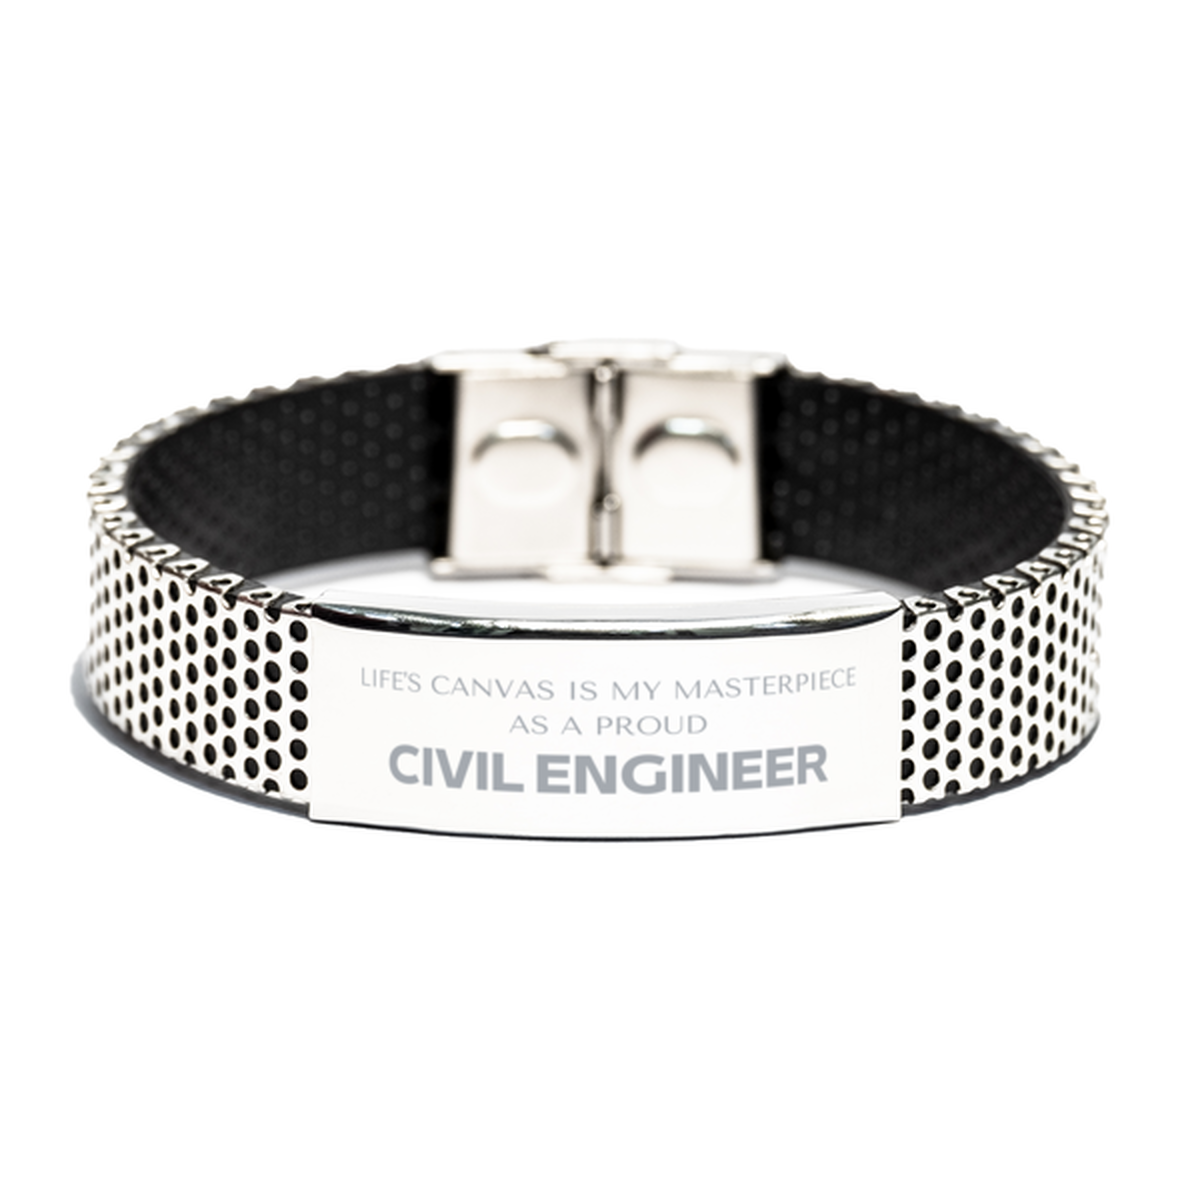 Proud Civil Engineer Gifts, Life's canvas is my masterpiece, Epic Birthday Christmas Unique Stainless Steel Bracelet For Civil Engineer, Coworkers, Men, Women, Friends